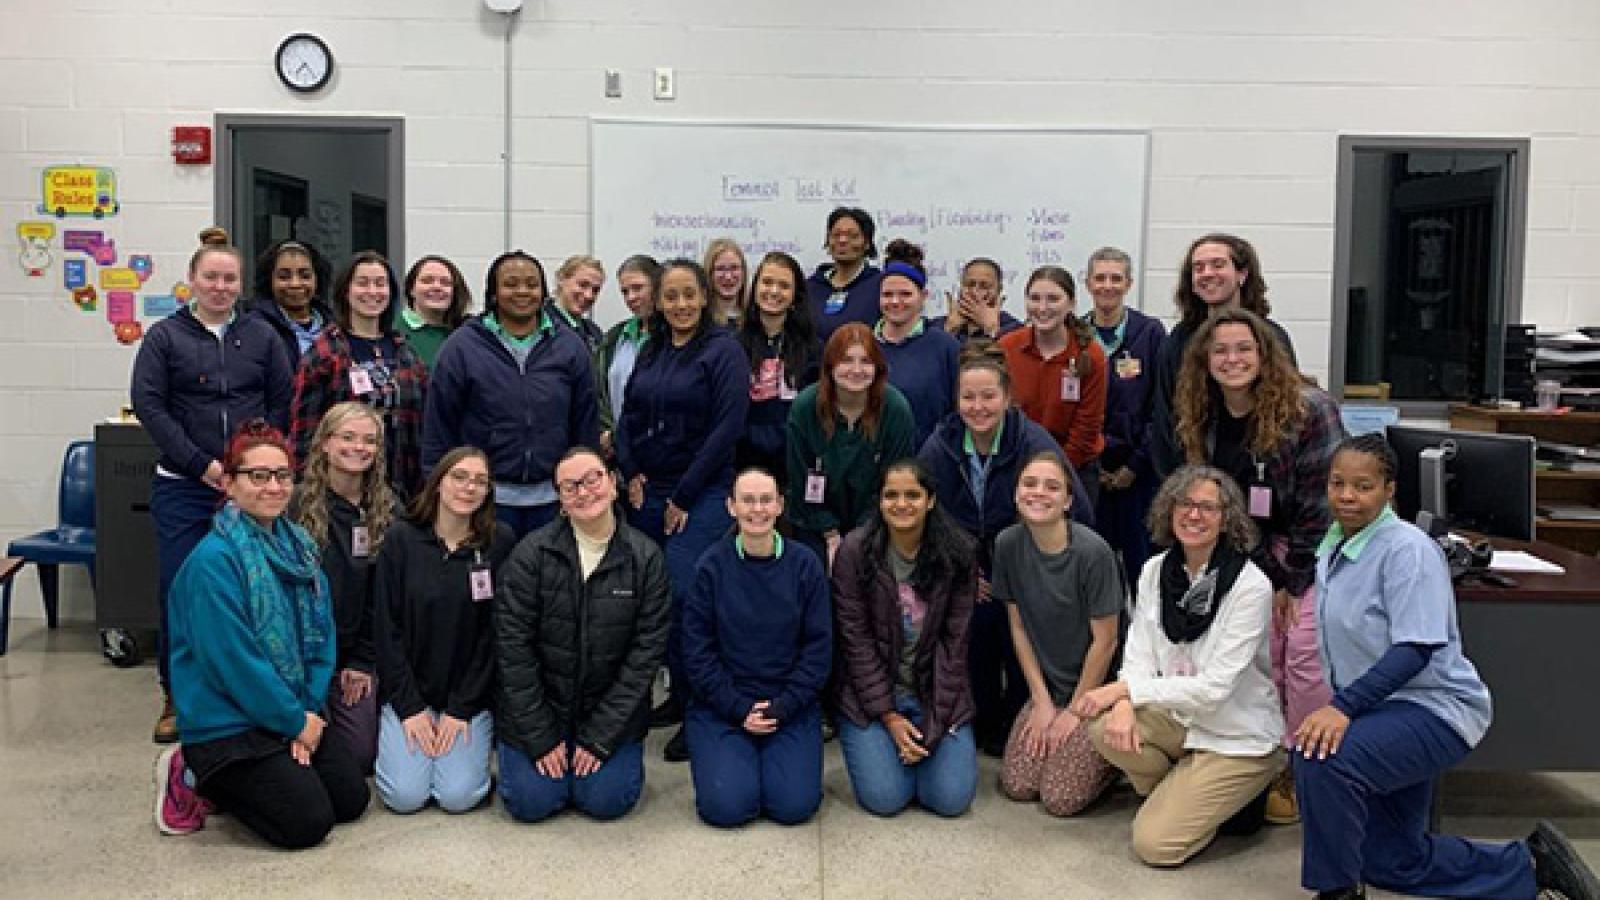 Students from Dr. Mary Thomas' Autumn 2022 WGSS 1110H class smile for a group photo taken during their final day of class at the Ohio Reformatory for Women.